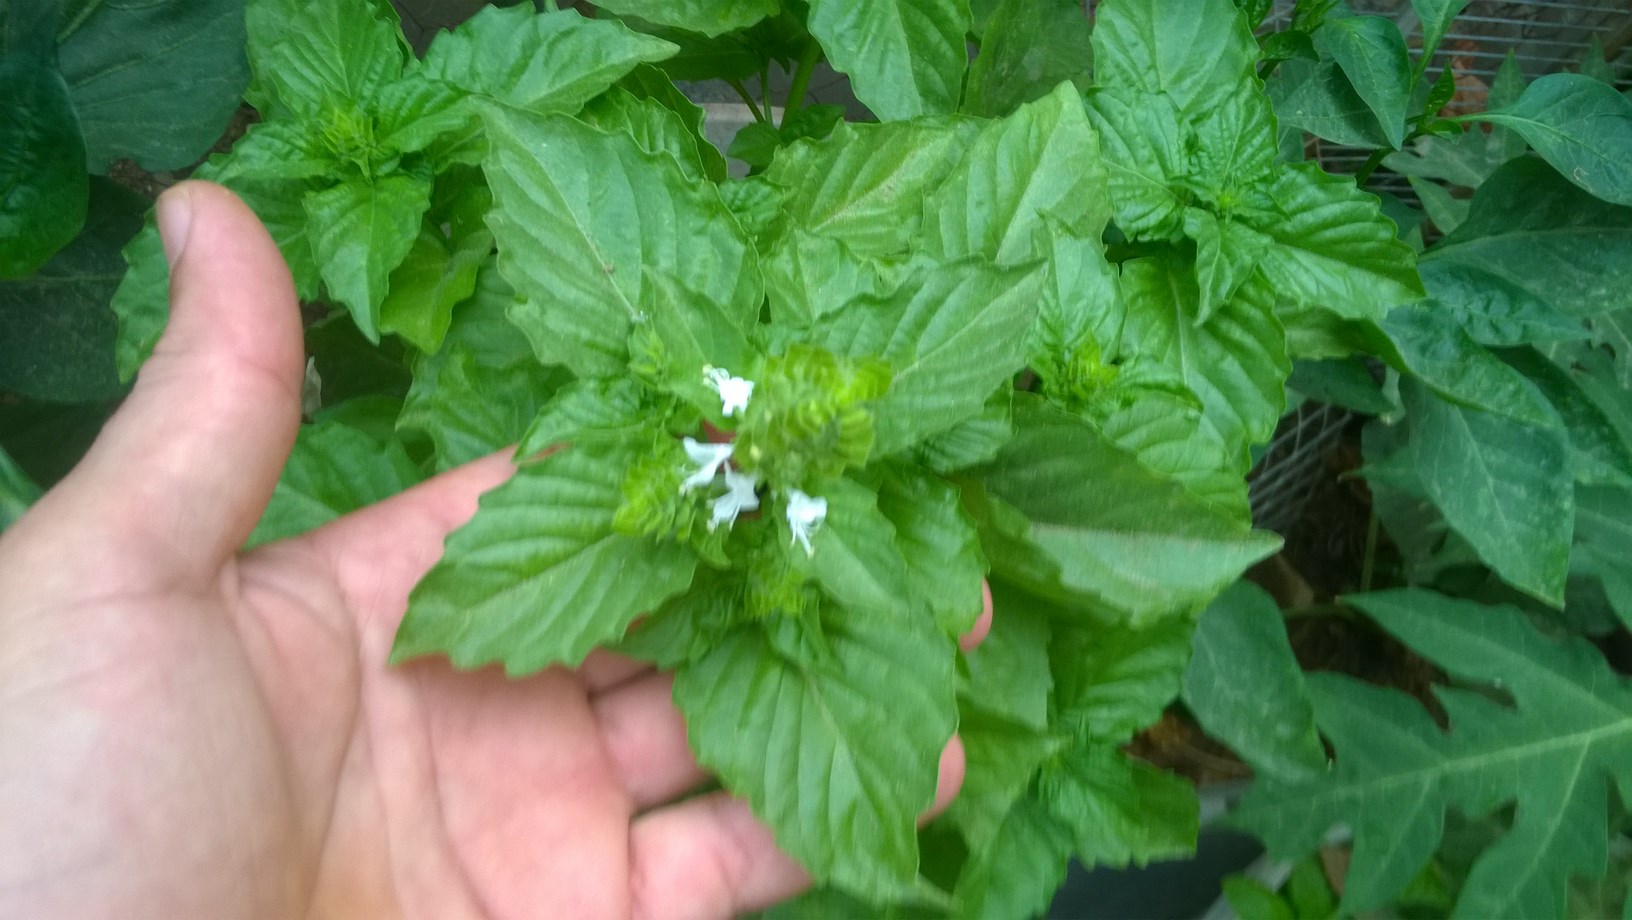 Check your basil plants frequently for flowers, and if you see any, pinch them off right away.